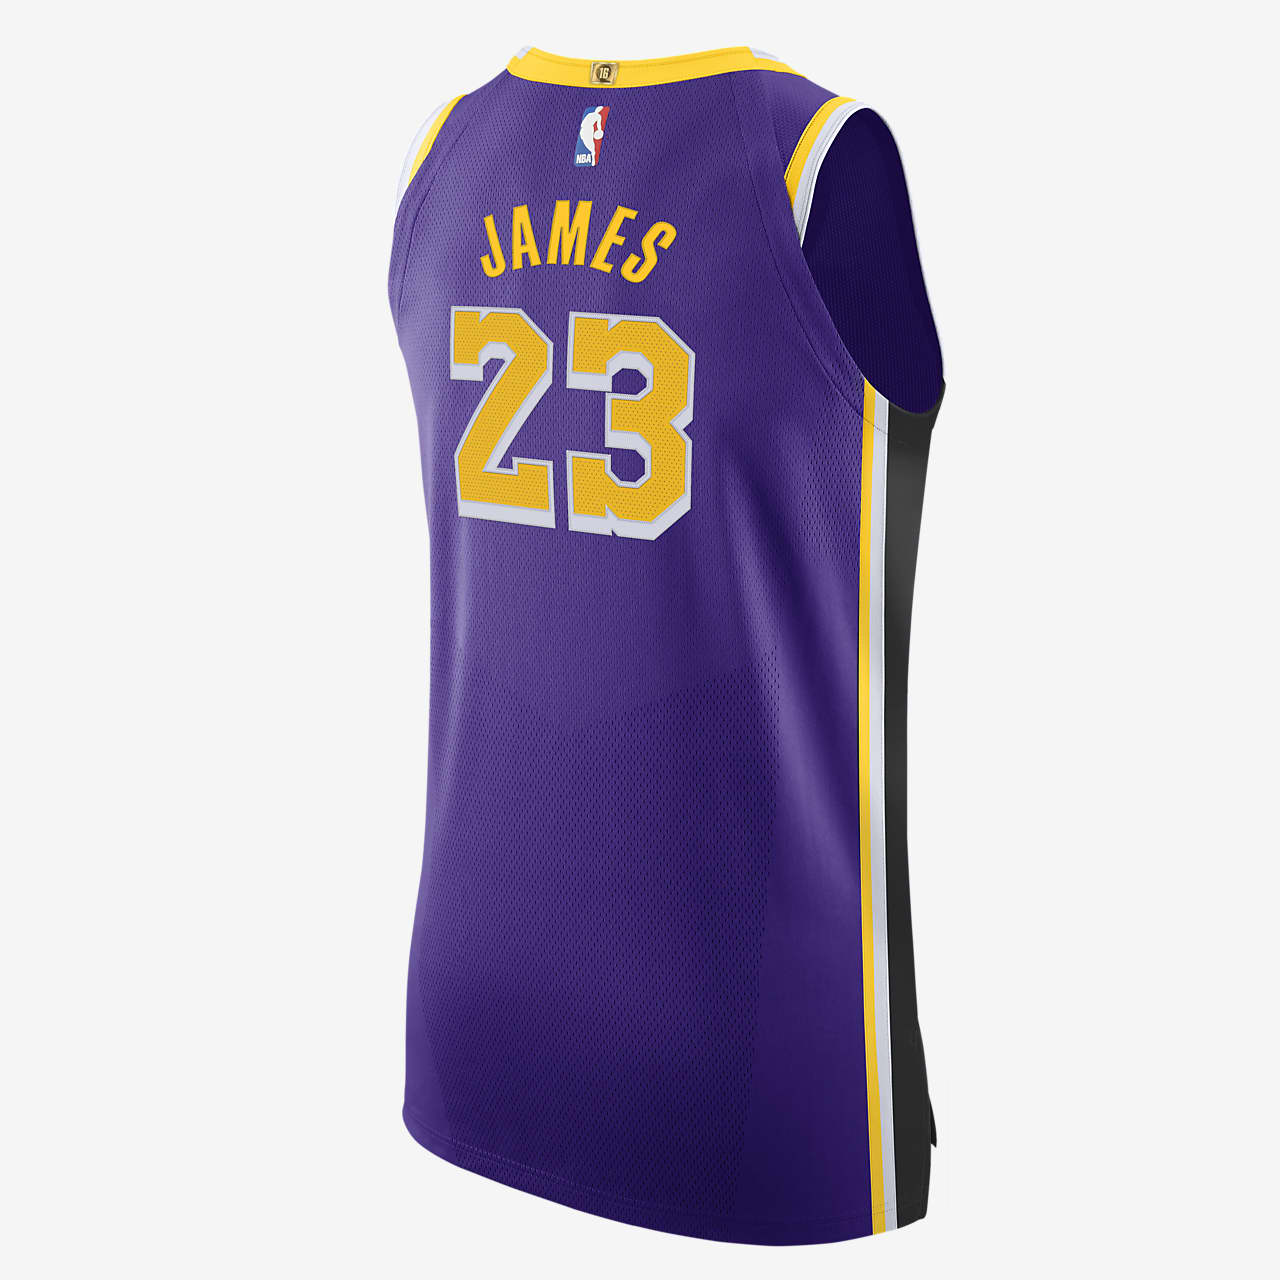 lakers statement jersey nike Off 52% - www.bashhguidelines.org